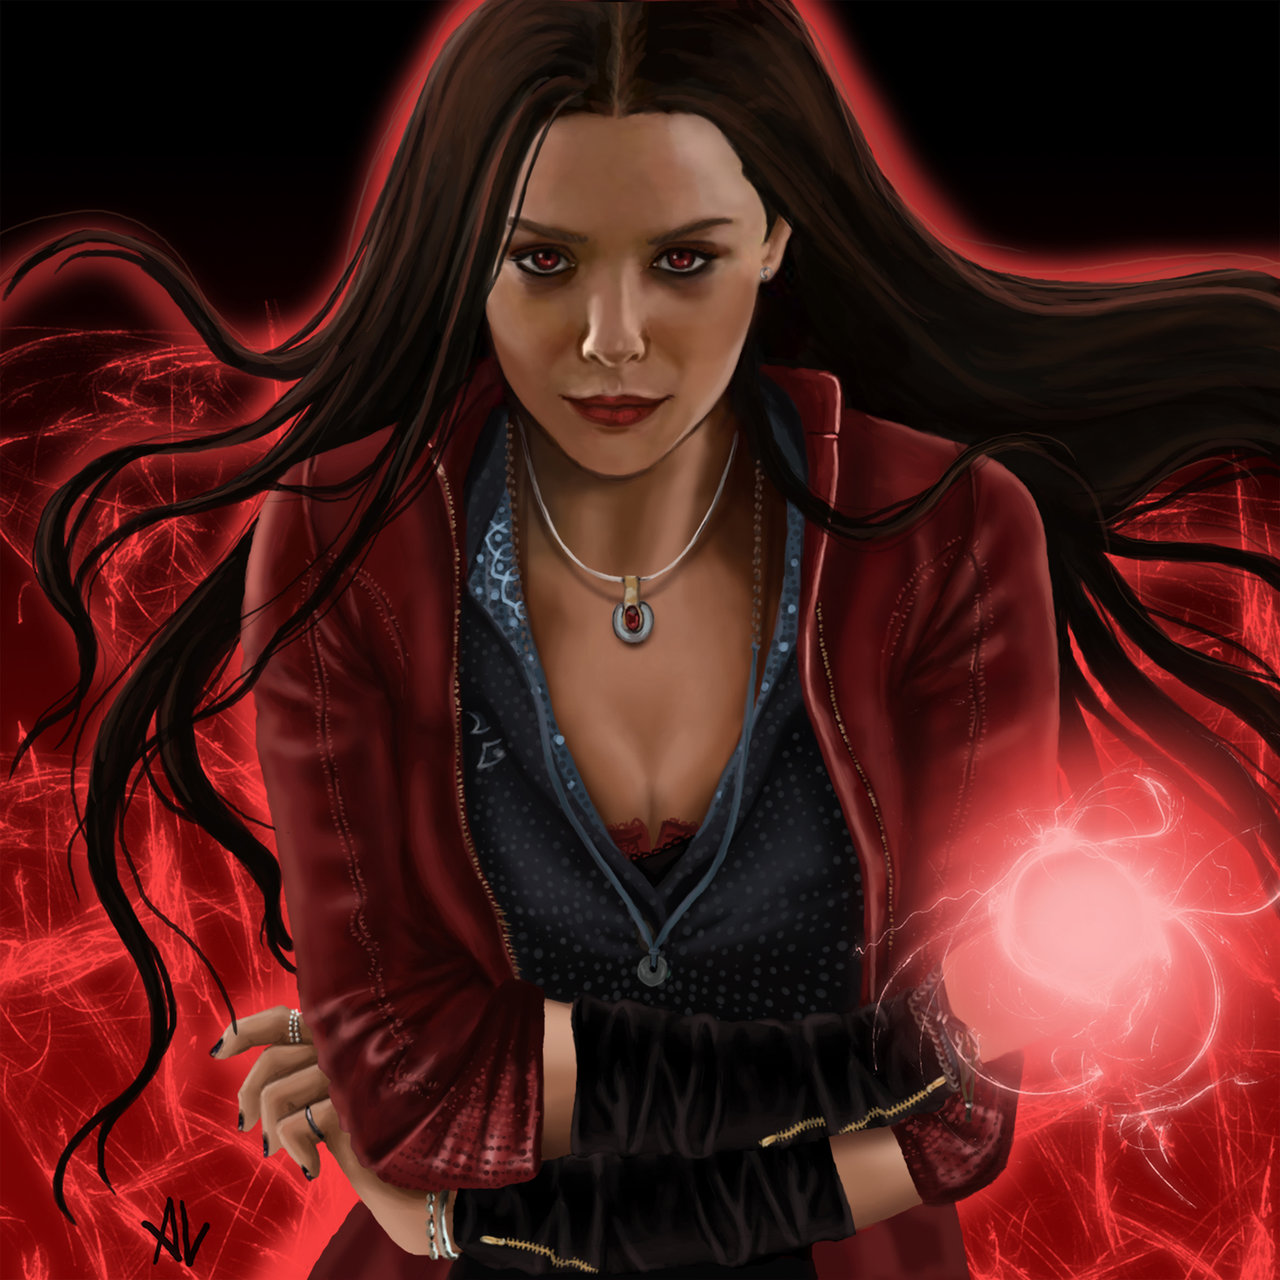  on October 3 2015 By Stephen Comments Off on Scarlet Witch Wallpaper